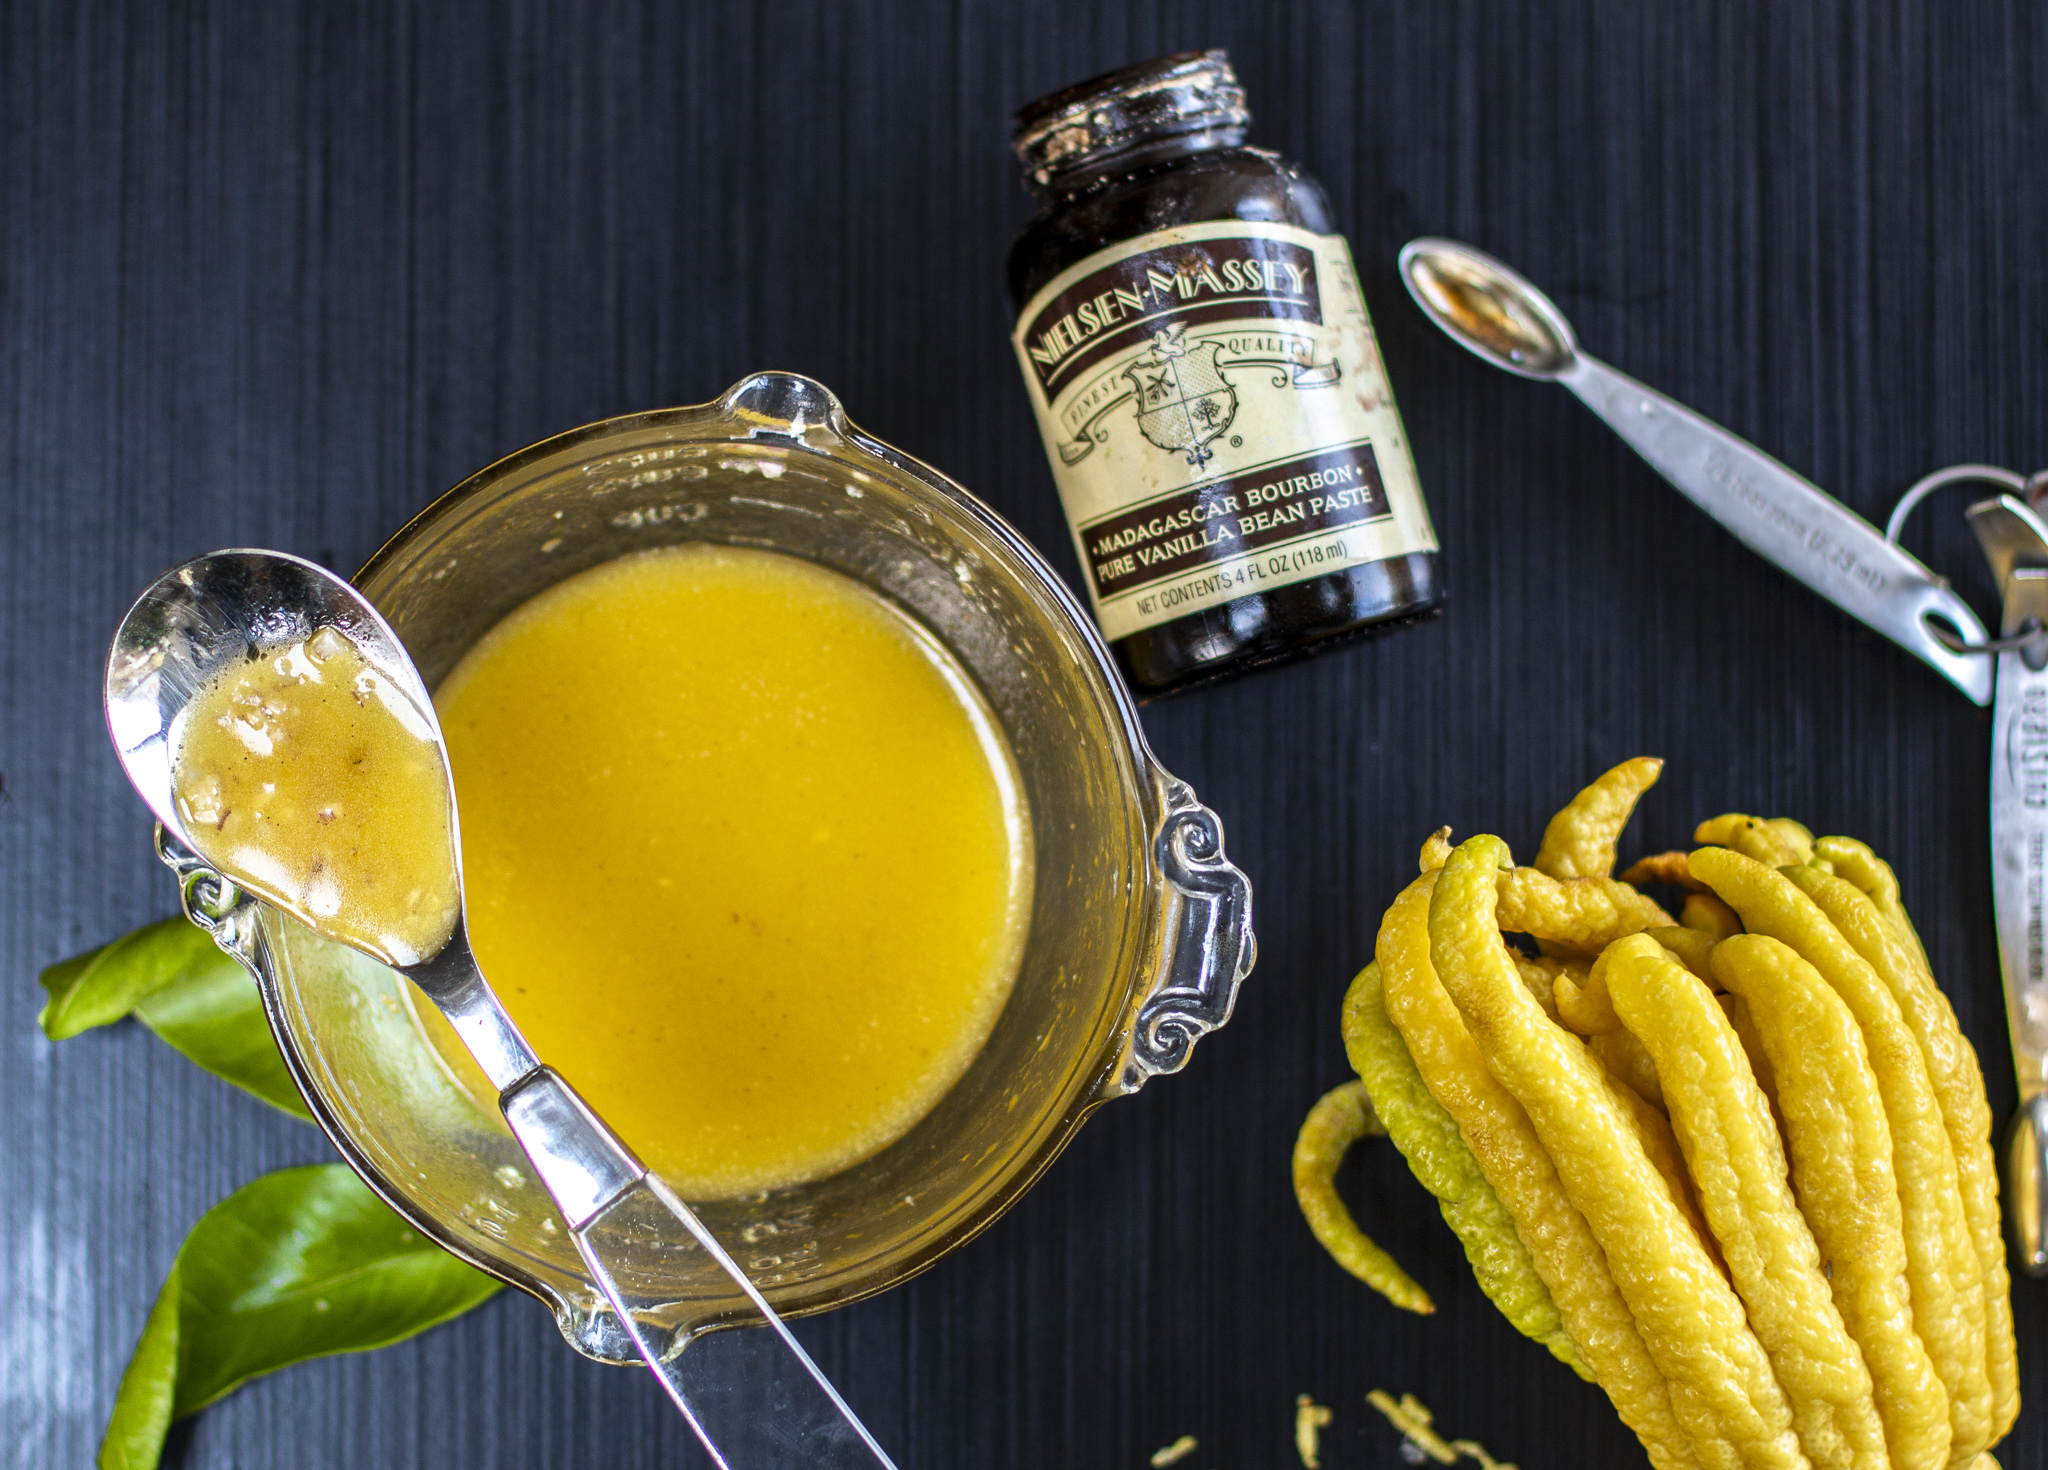 A zesty vinaigrette with citrus juices and finished with the floral notes of vanilla bean